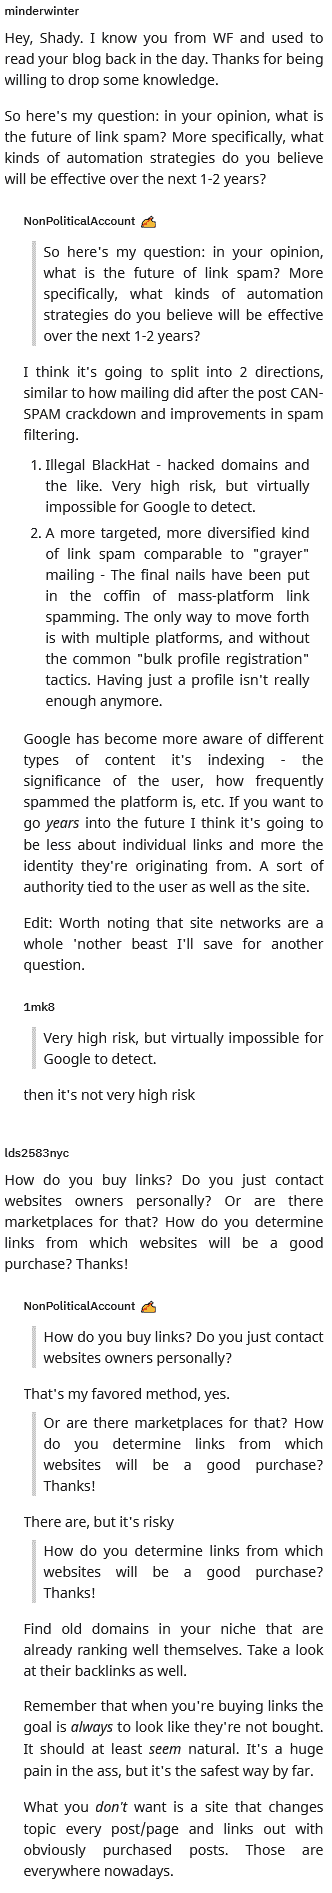 someone opened ama about seo blackhat and gray hat